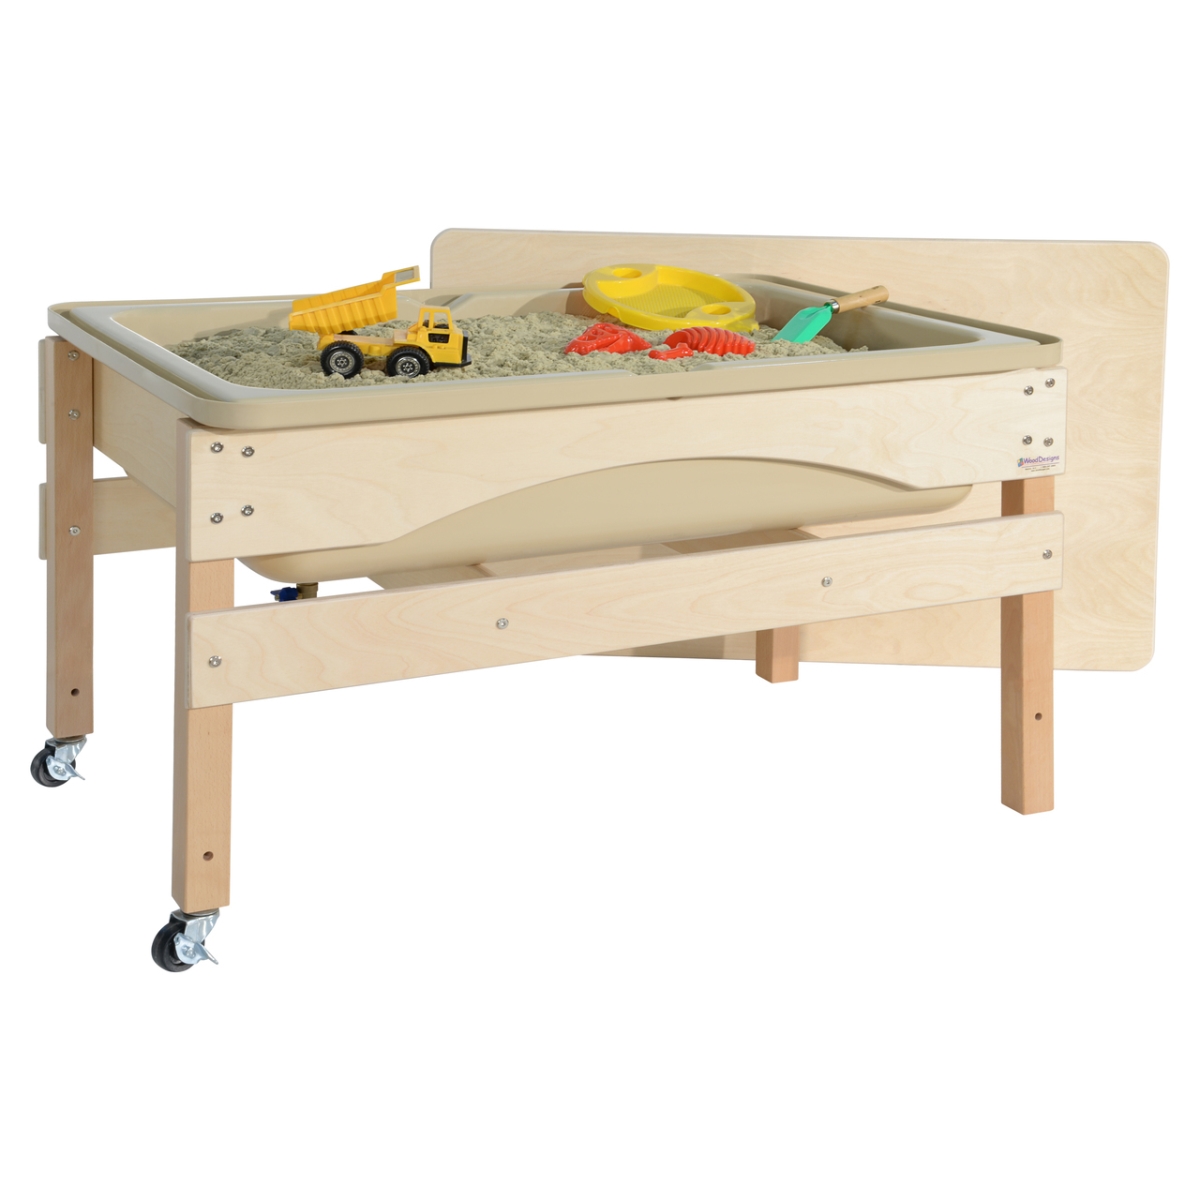 11825tn Absolute Best Sand & Water Sensory Center With Lid